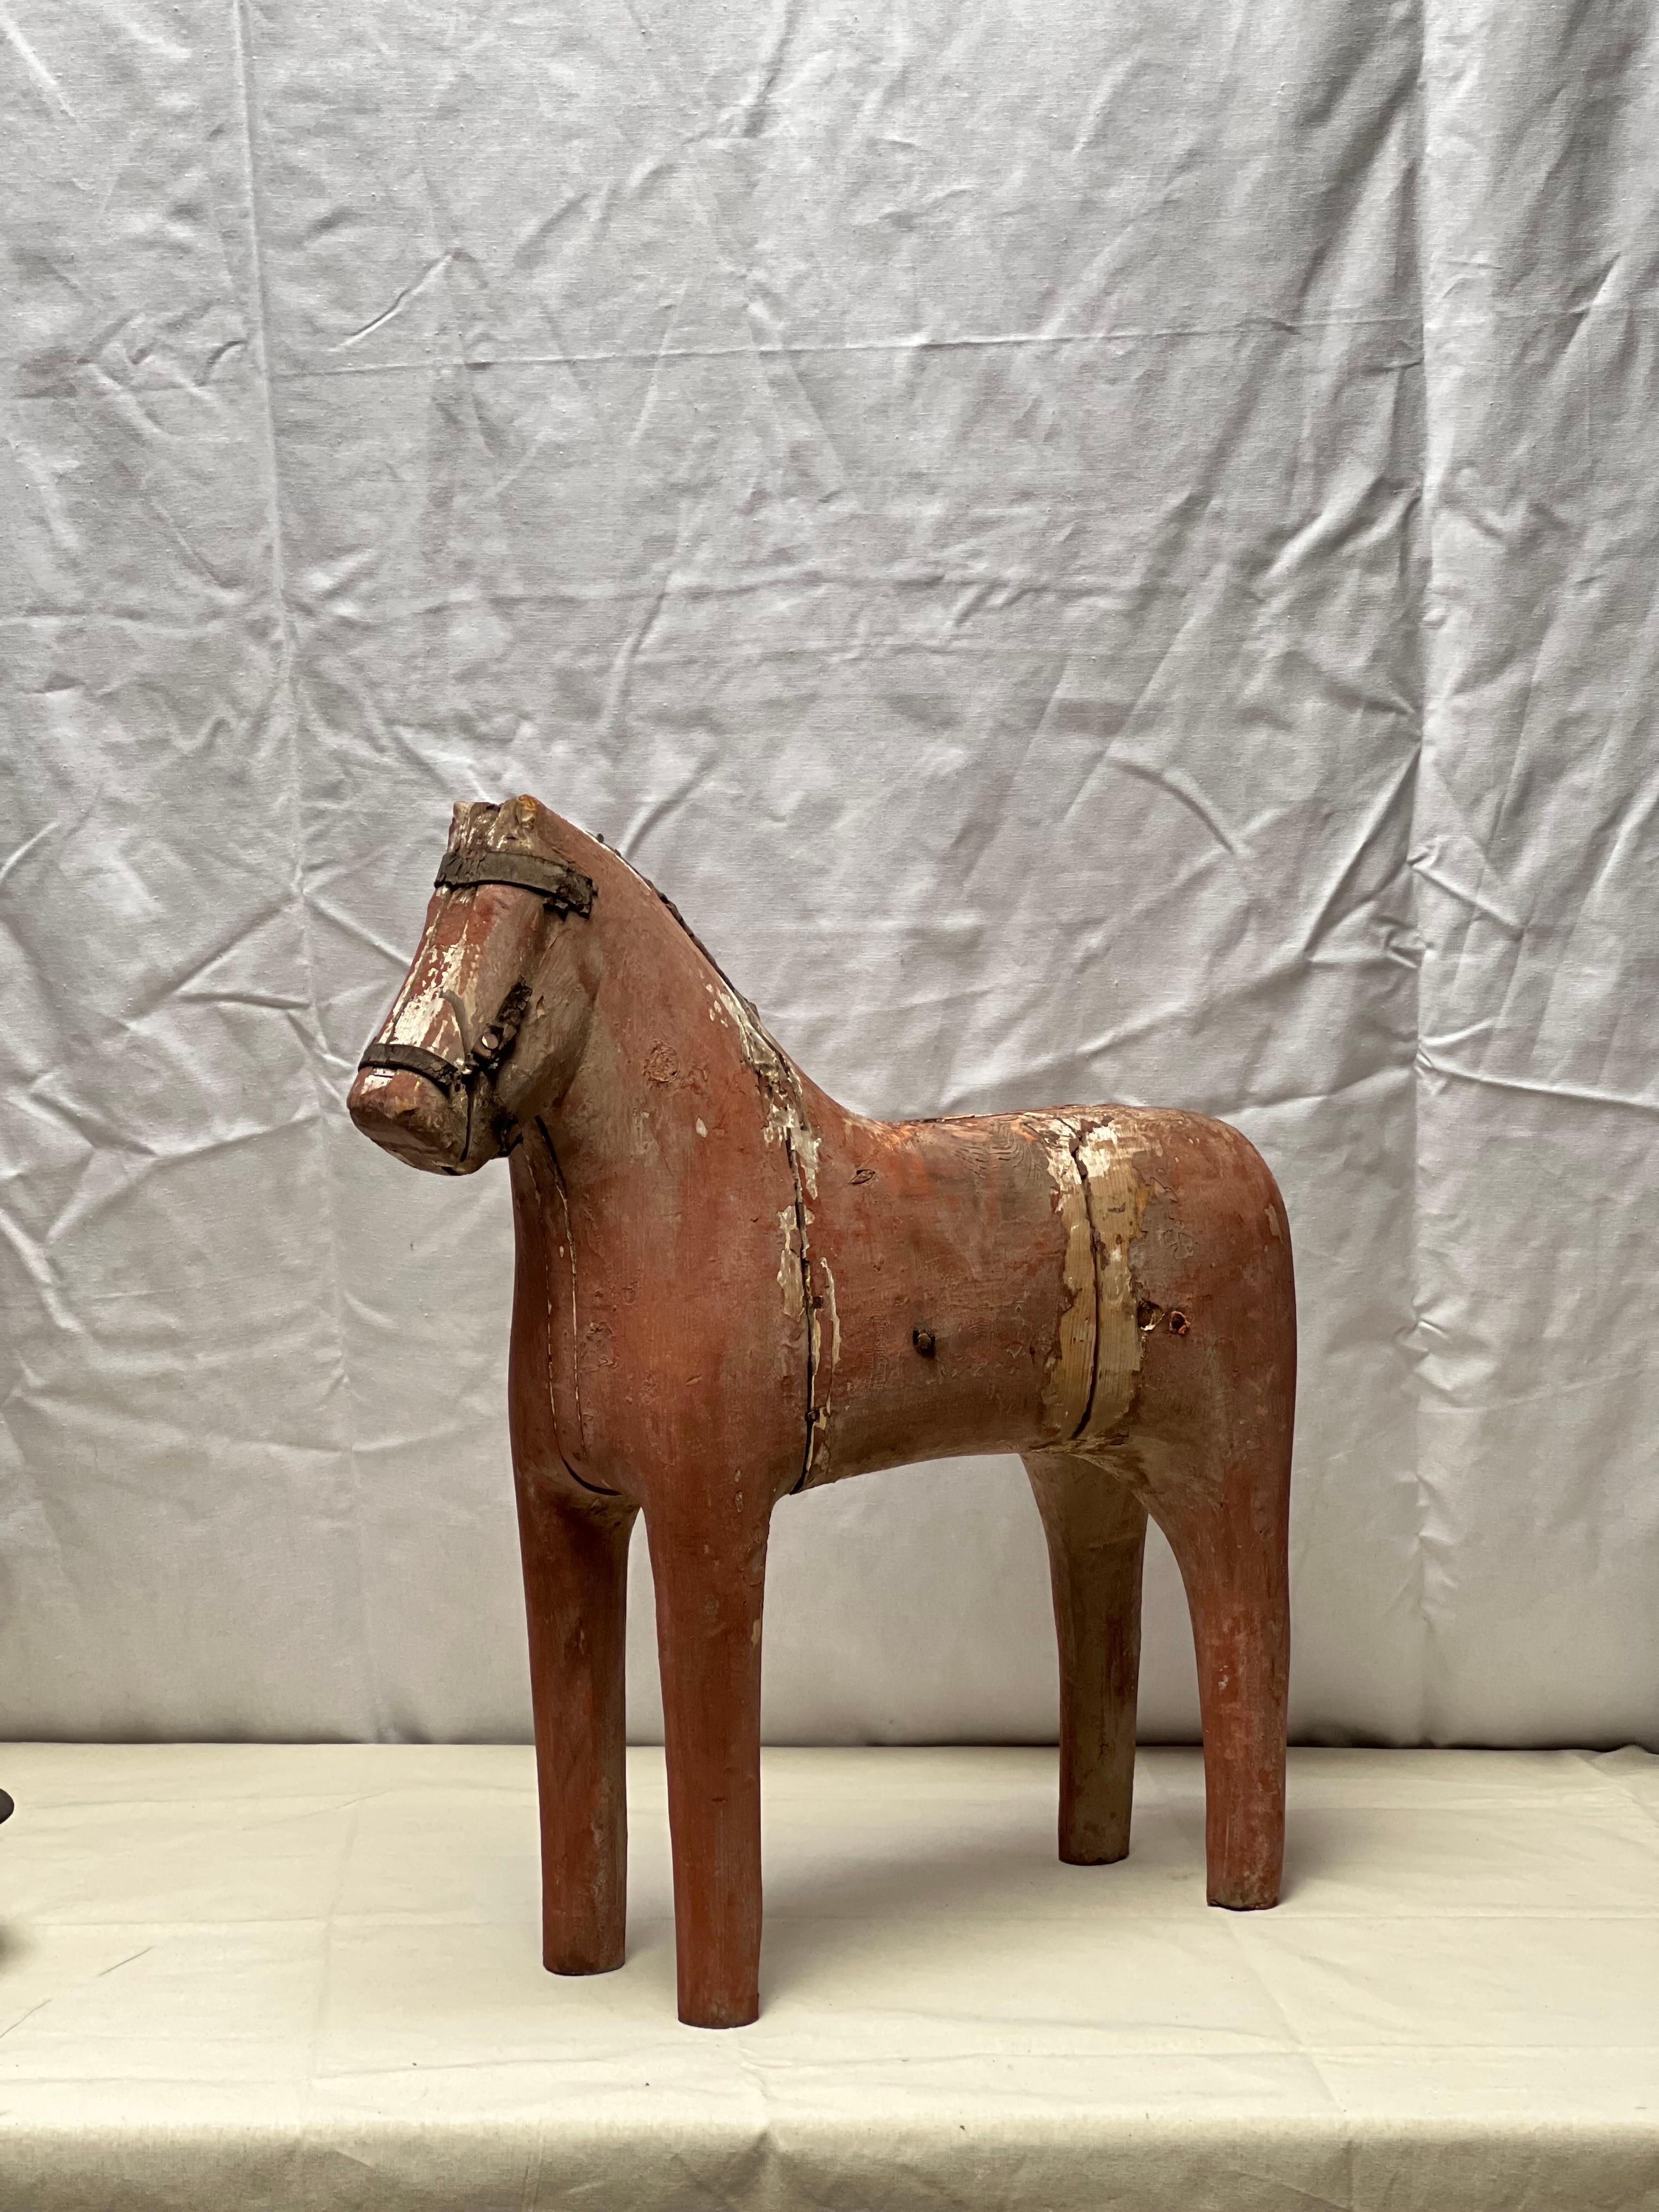 Big Swedish horse from the early 19th century. Made of pine wood with the famous red paint. It is worn but in a very nice way. The patina shows the trace of time. There's a whole on top of the back that might have been used as a candleholder. An